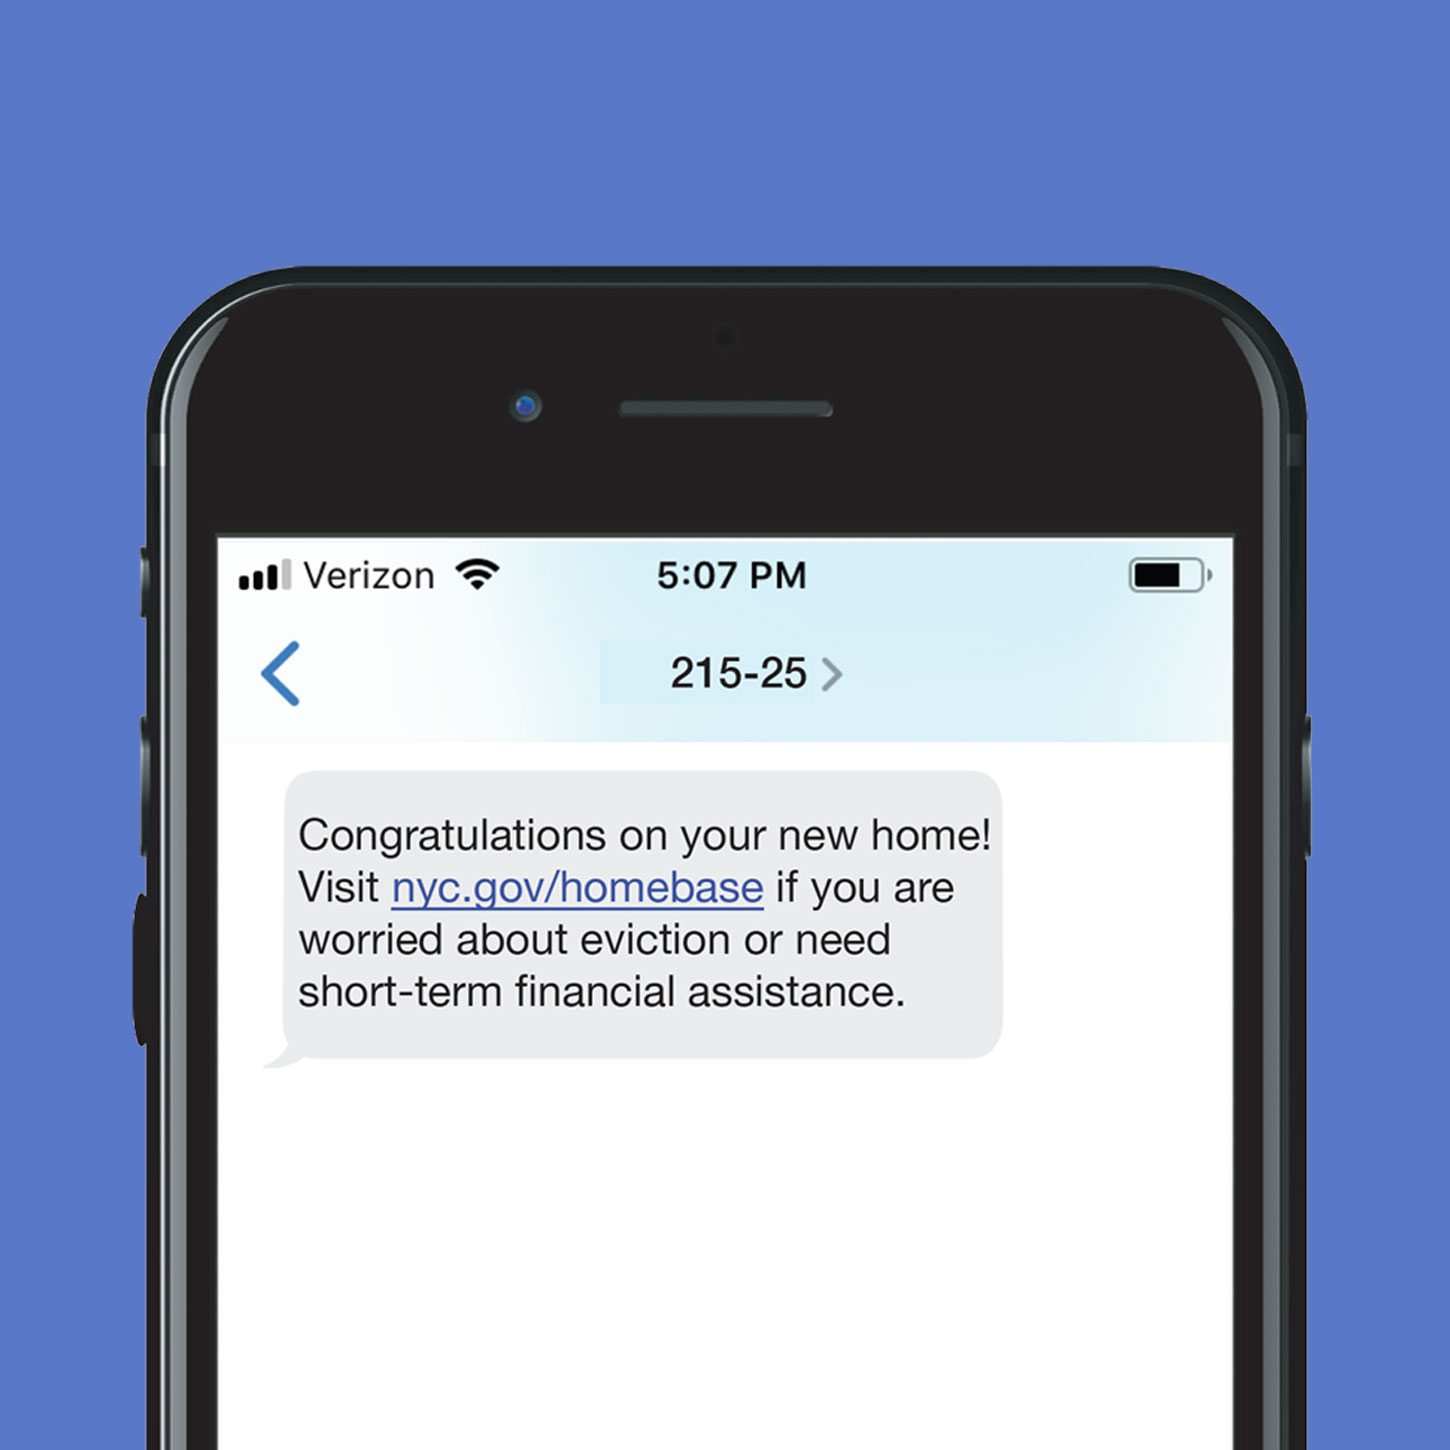 A text message on a smartphone reads "Congratulations on your new home! Visit nyc.gov/homebase if you are worried about eviction or need short-term financial assistance."